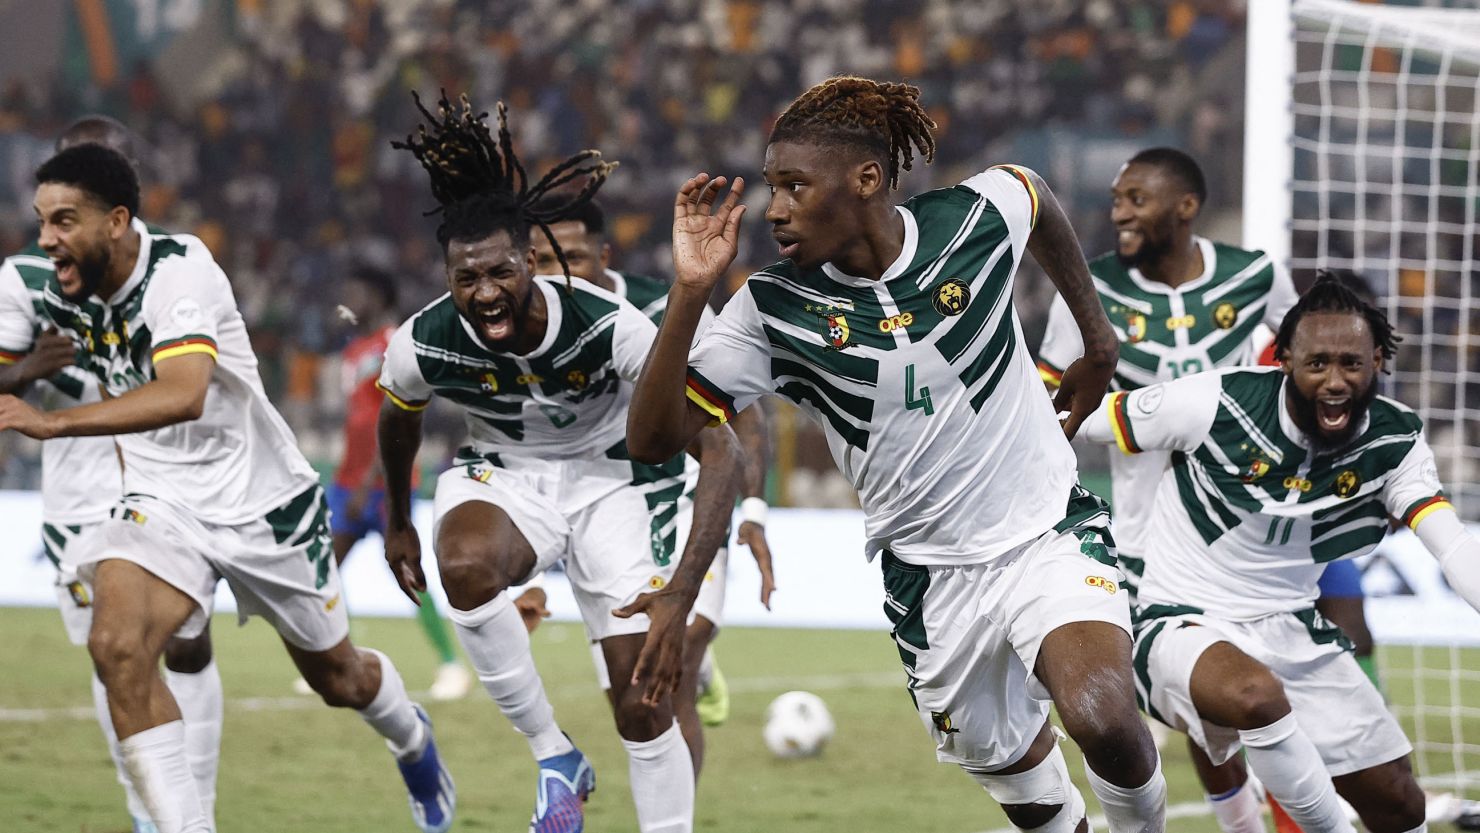 AFCON Adventure Match: Cameroon vs. Gambia